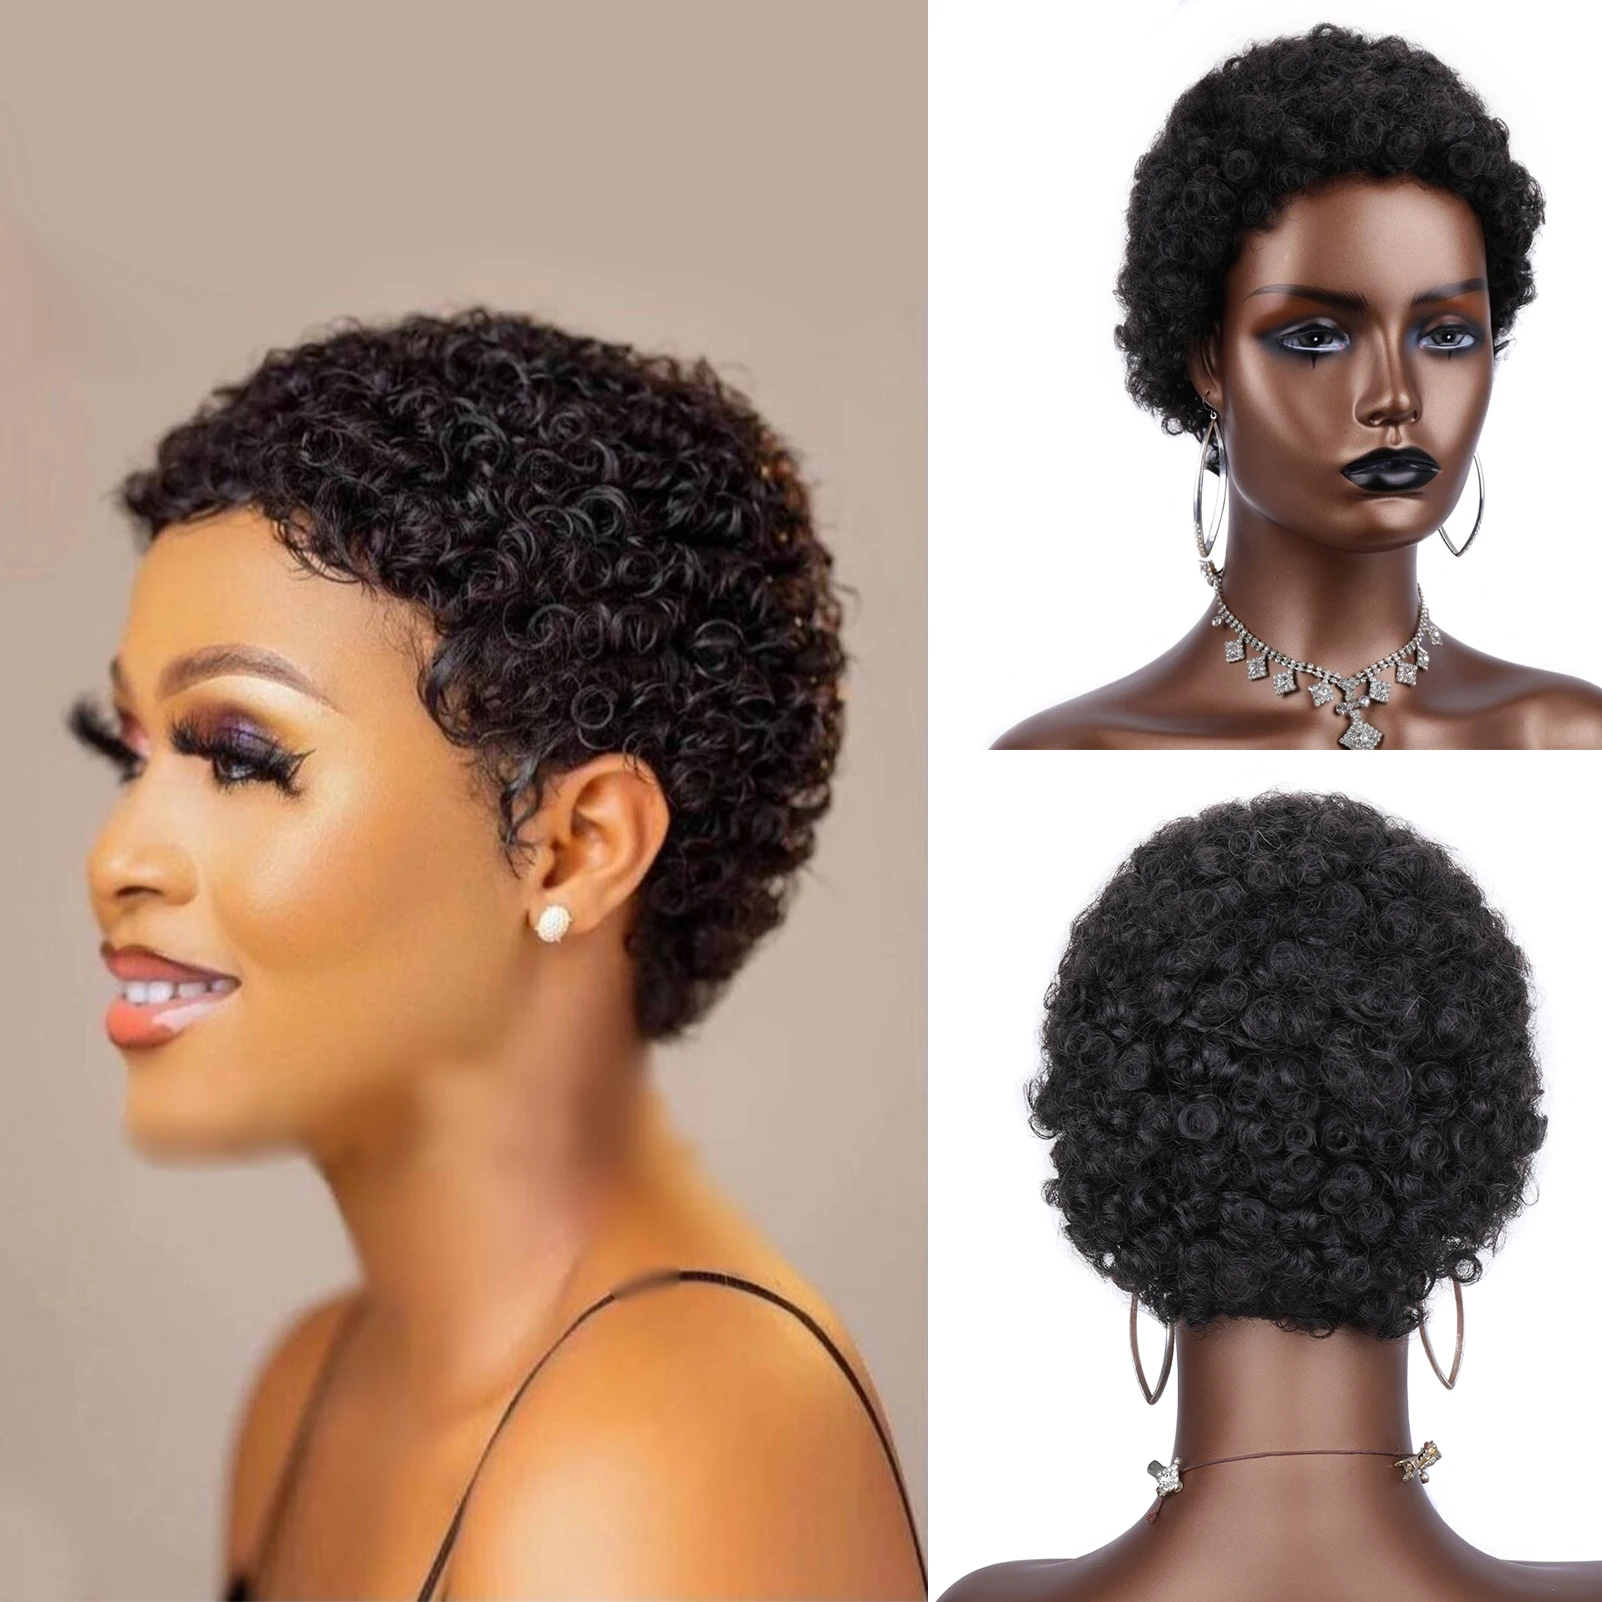 

Super short afro curl pixie wig 100% human hair Brazil remy no lace wig boy hairstyle kinky Jerry curly wig for men and women